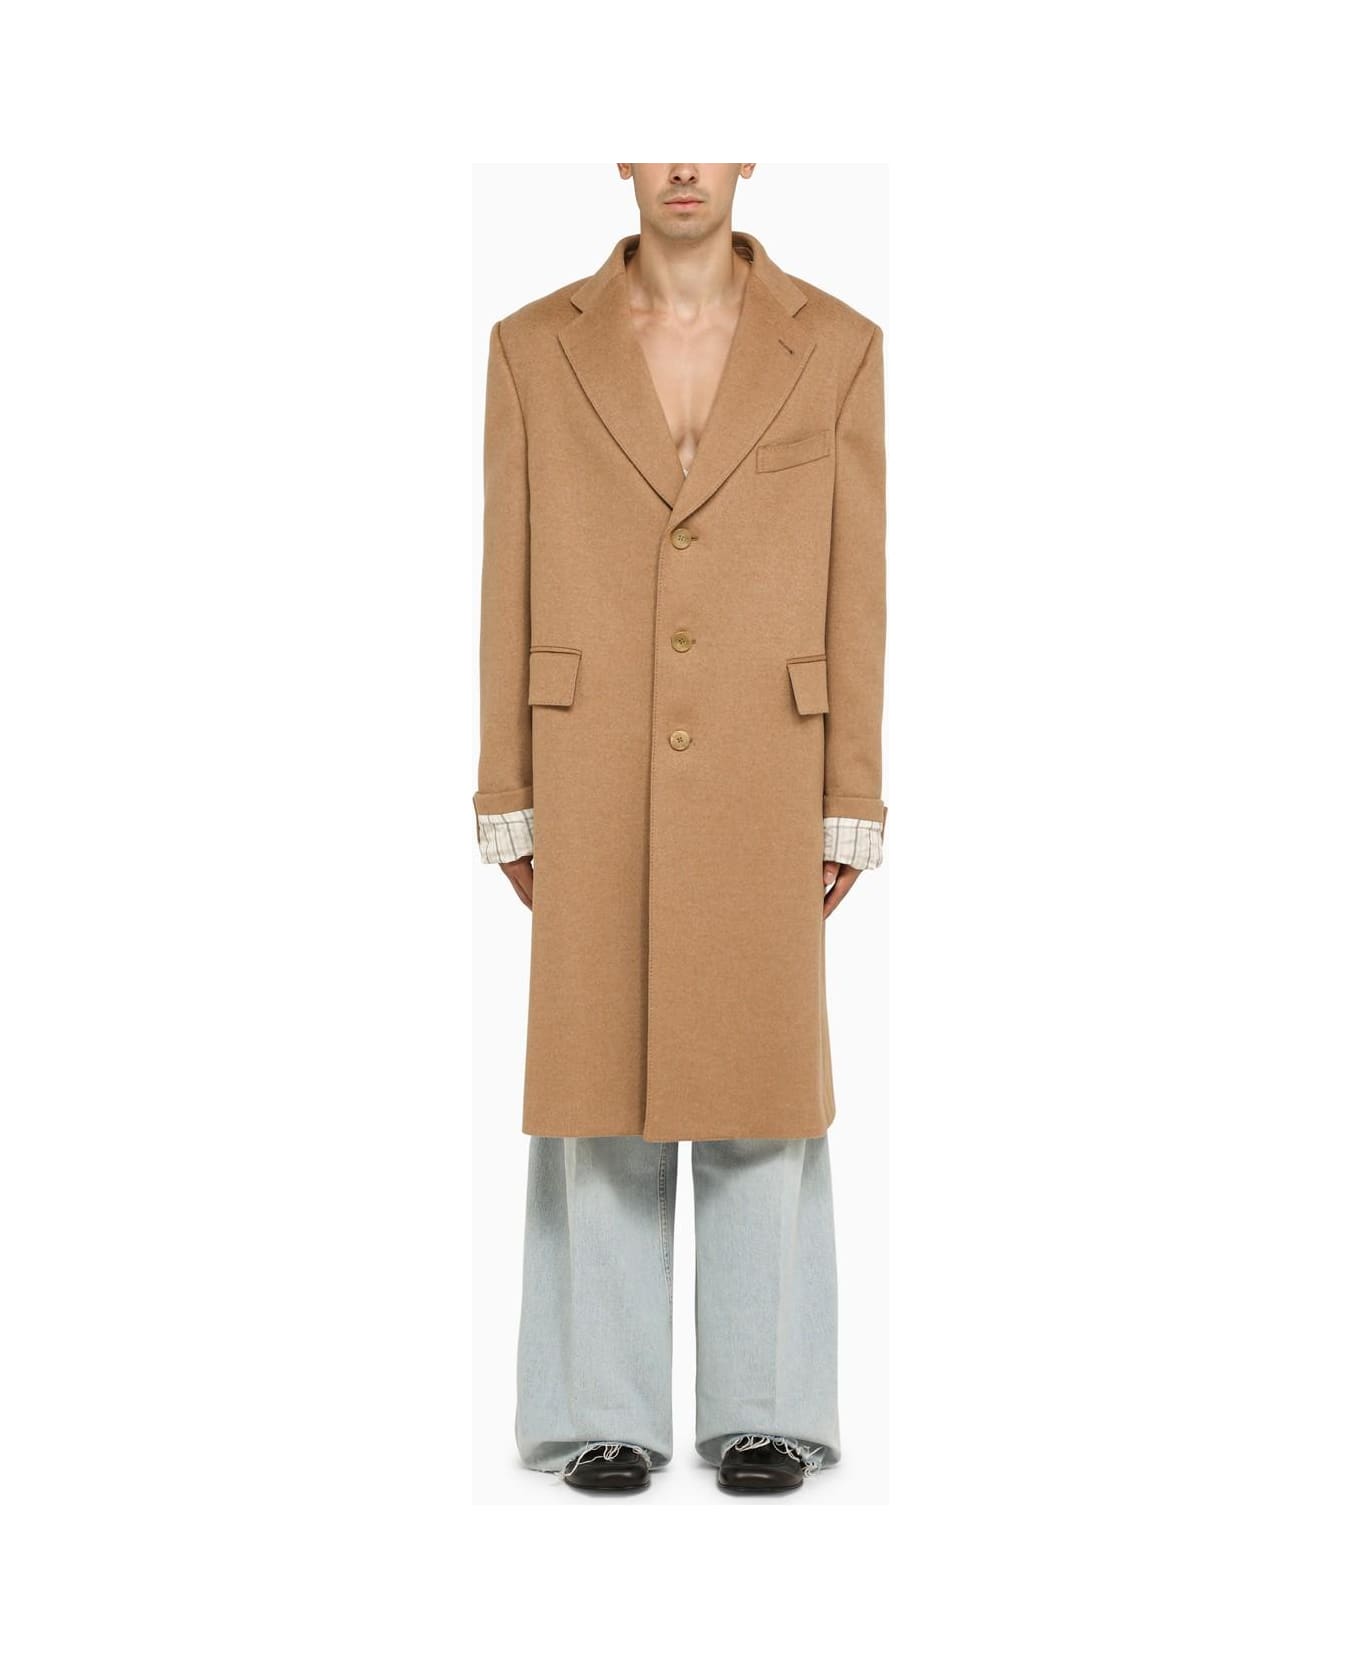 Gucci Single-breasted Camel Coat - Camel